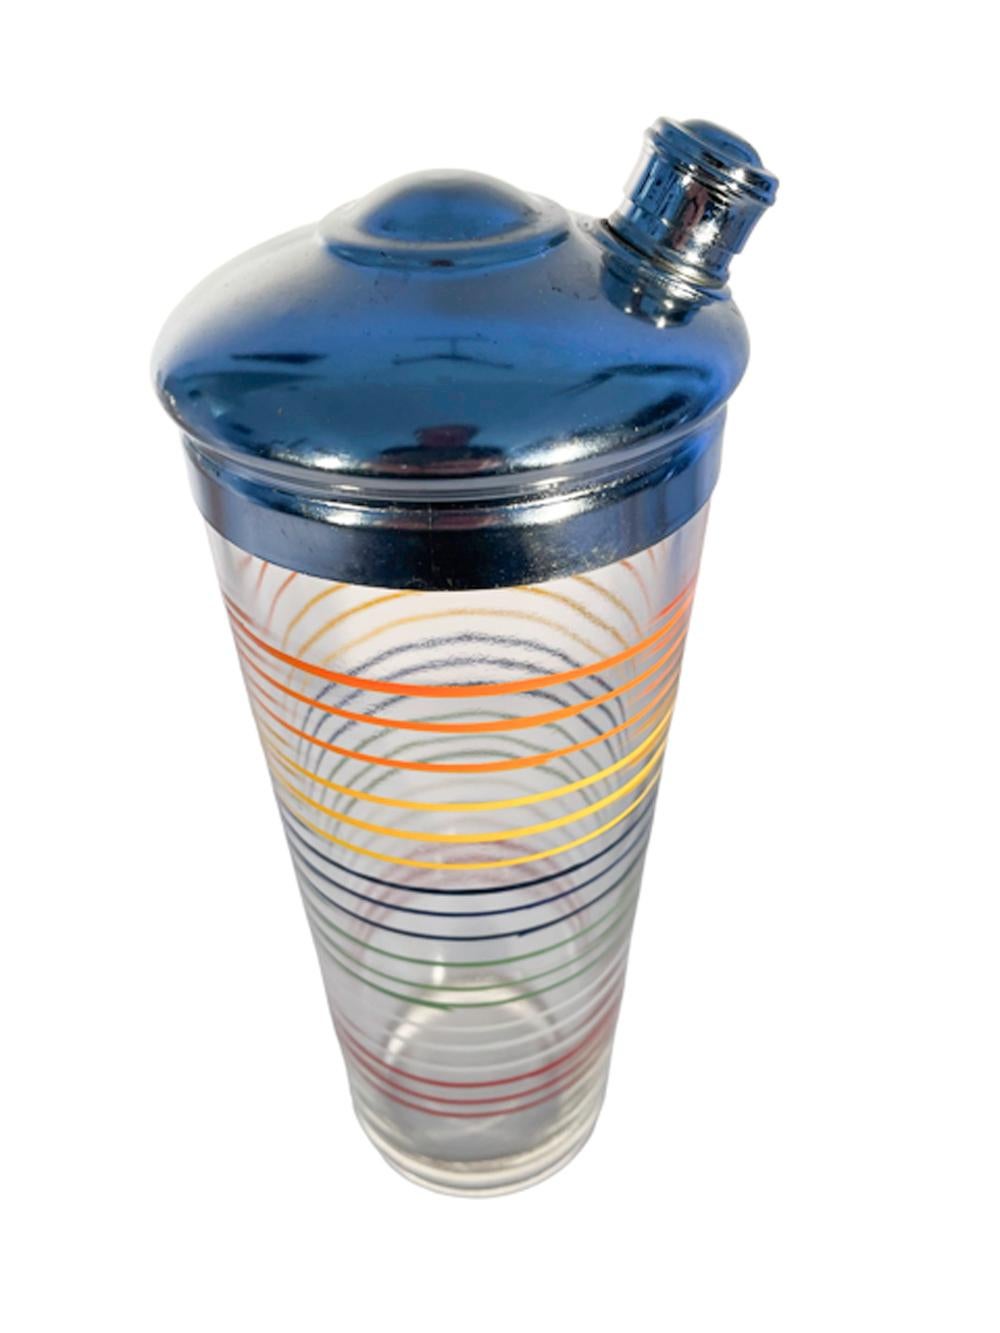 Art Deco glass cocktail shaker with chrome top and decorated in six colors comprising bands of three lines each. These 'racing stripes' were most likely a result of the popularity of the emerging automobile industry and the machine age design which